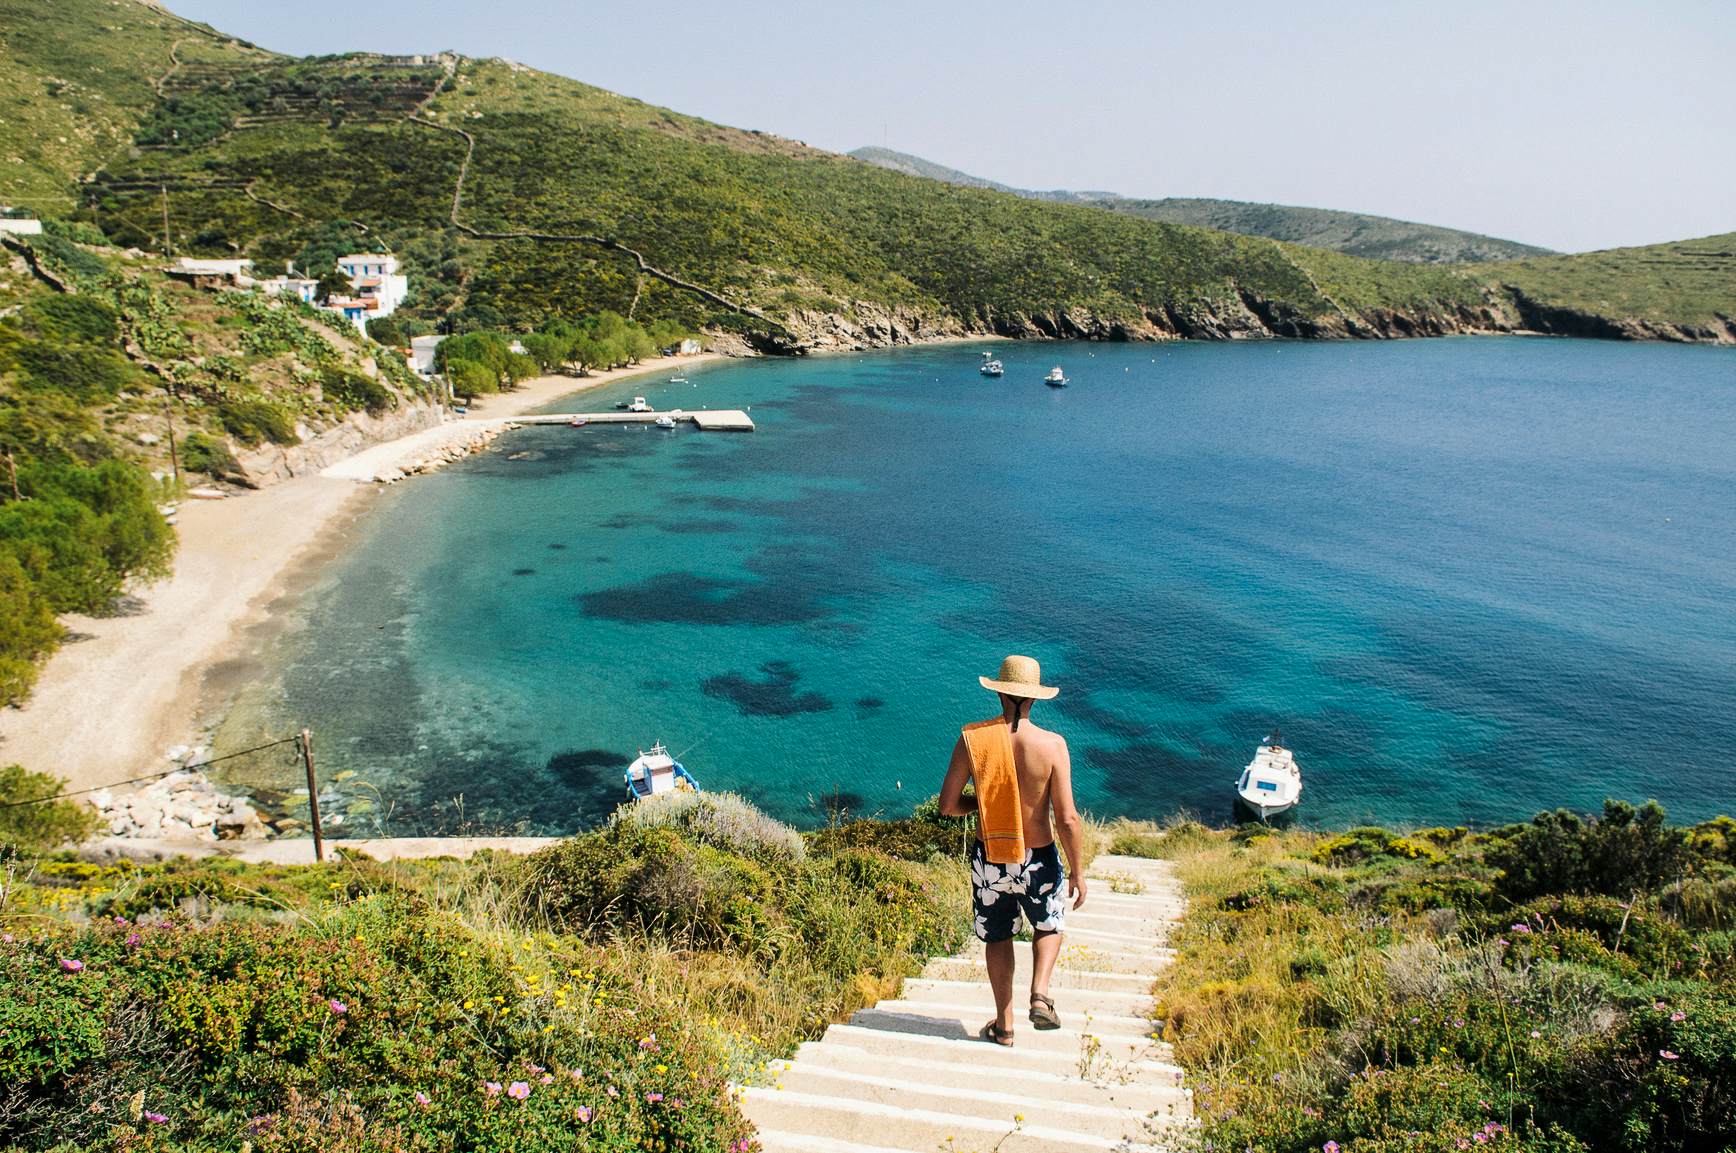 Walking in sunshine: a family adventure on the Greek island of